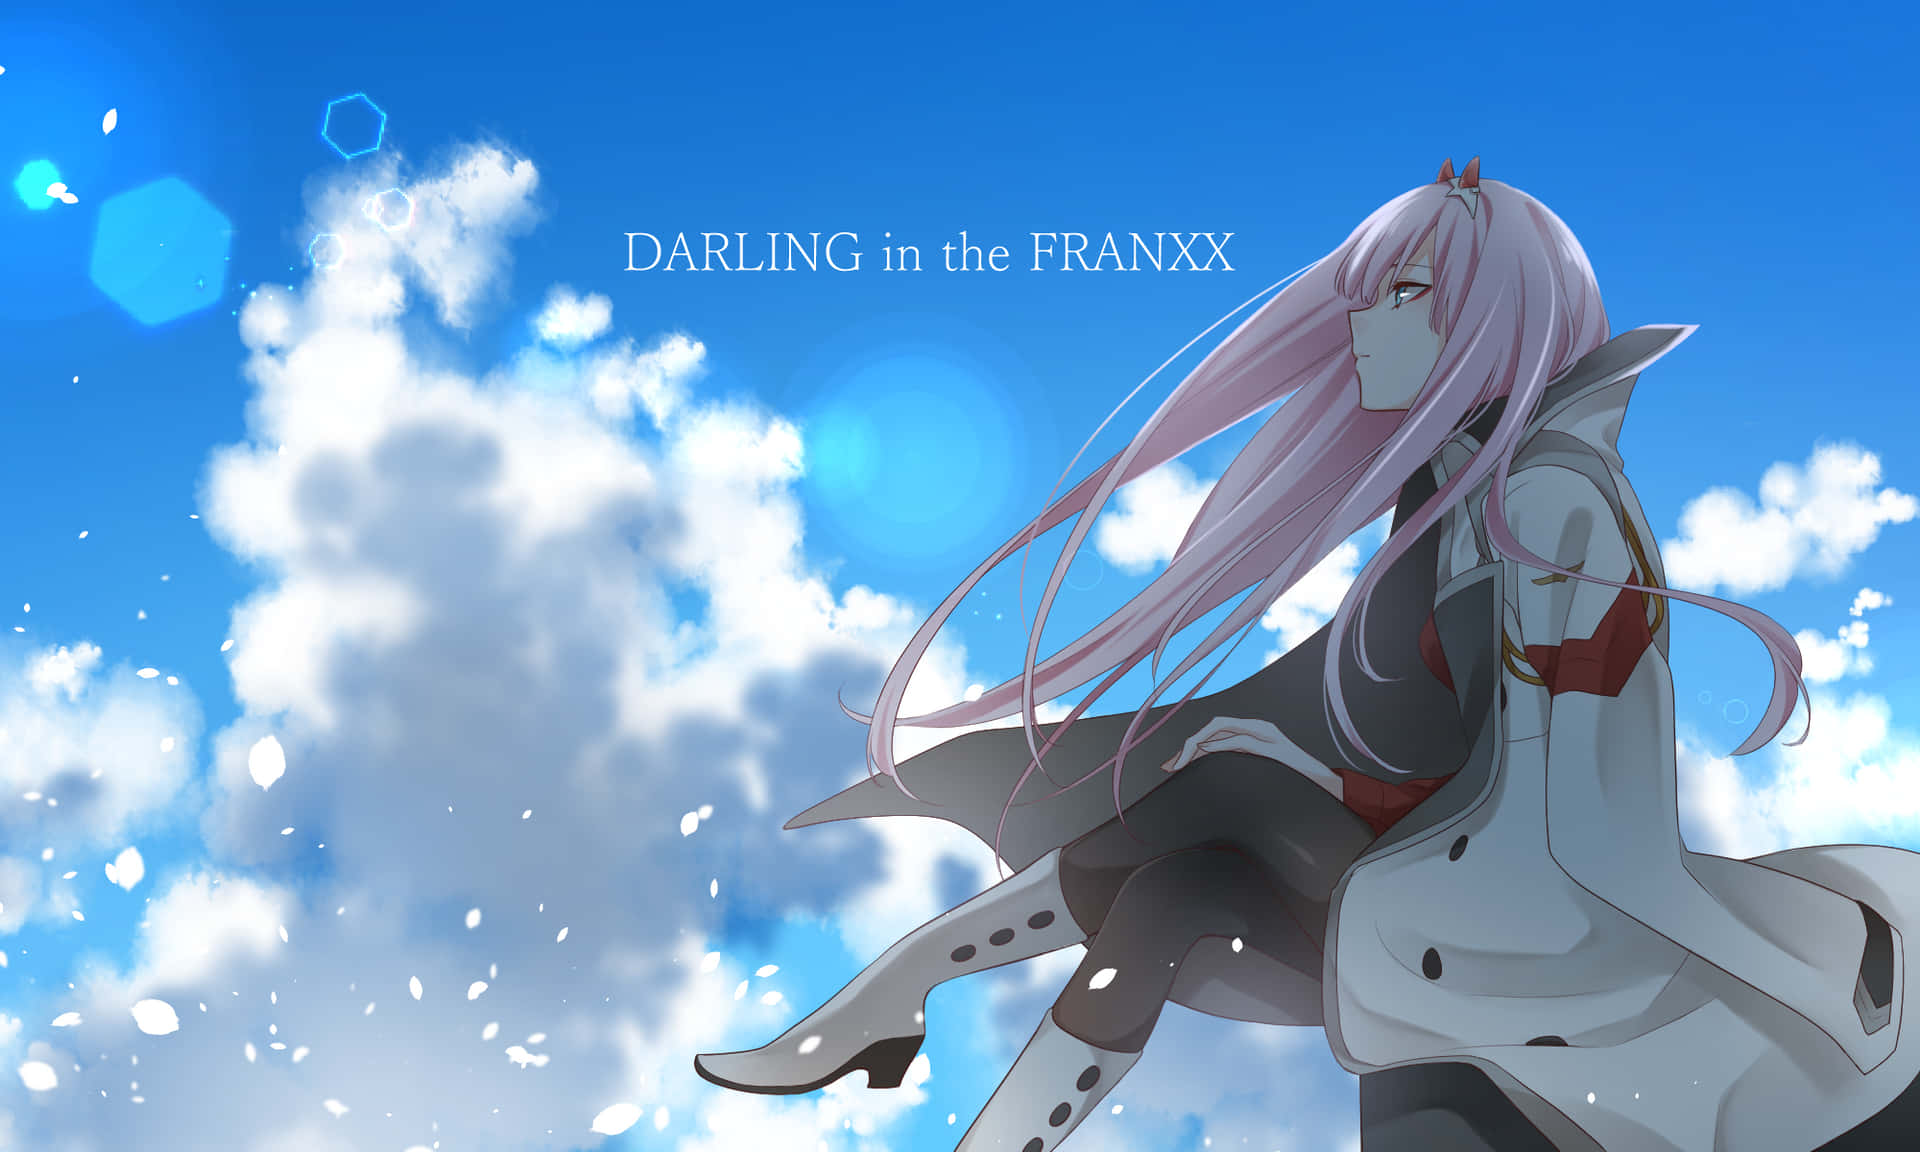 “Darling in the FranXX Set two Years Ahead”